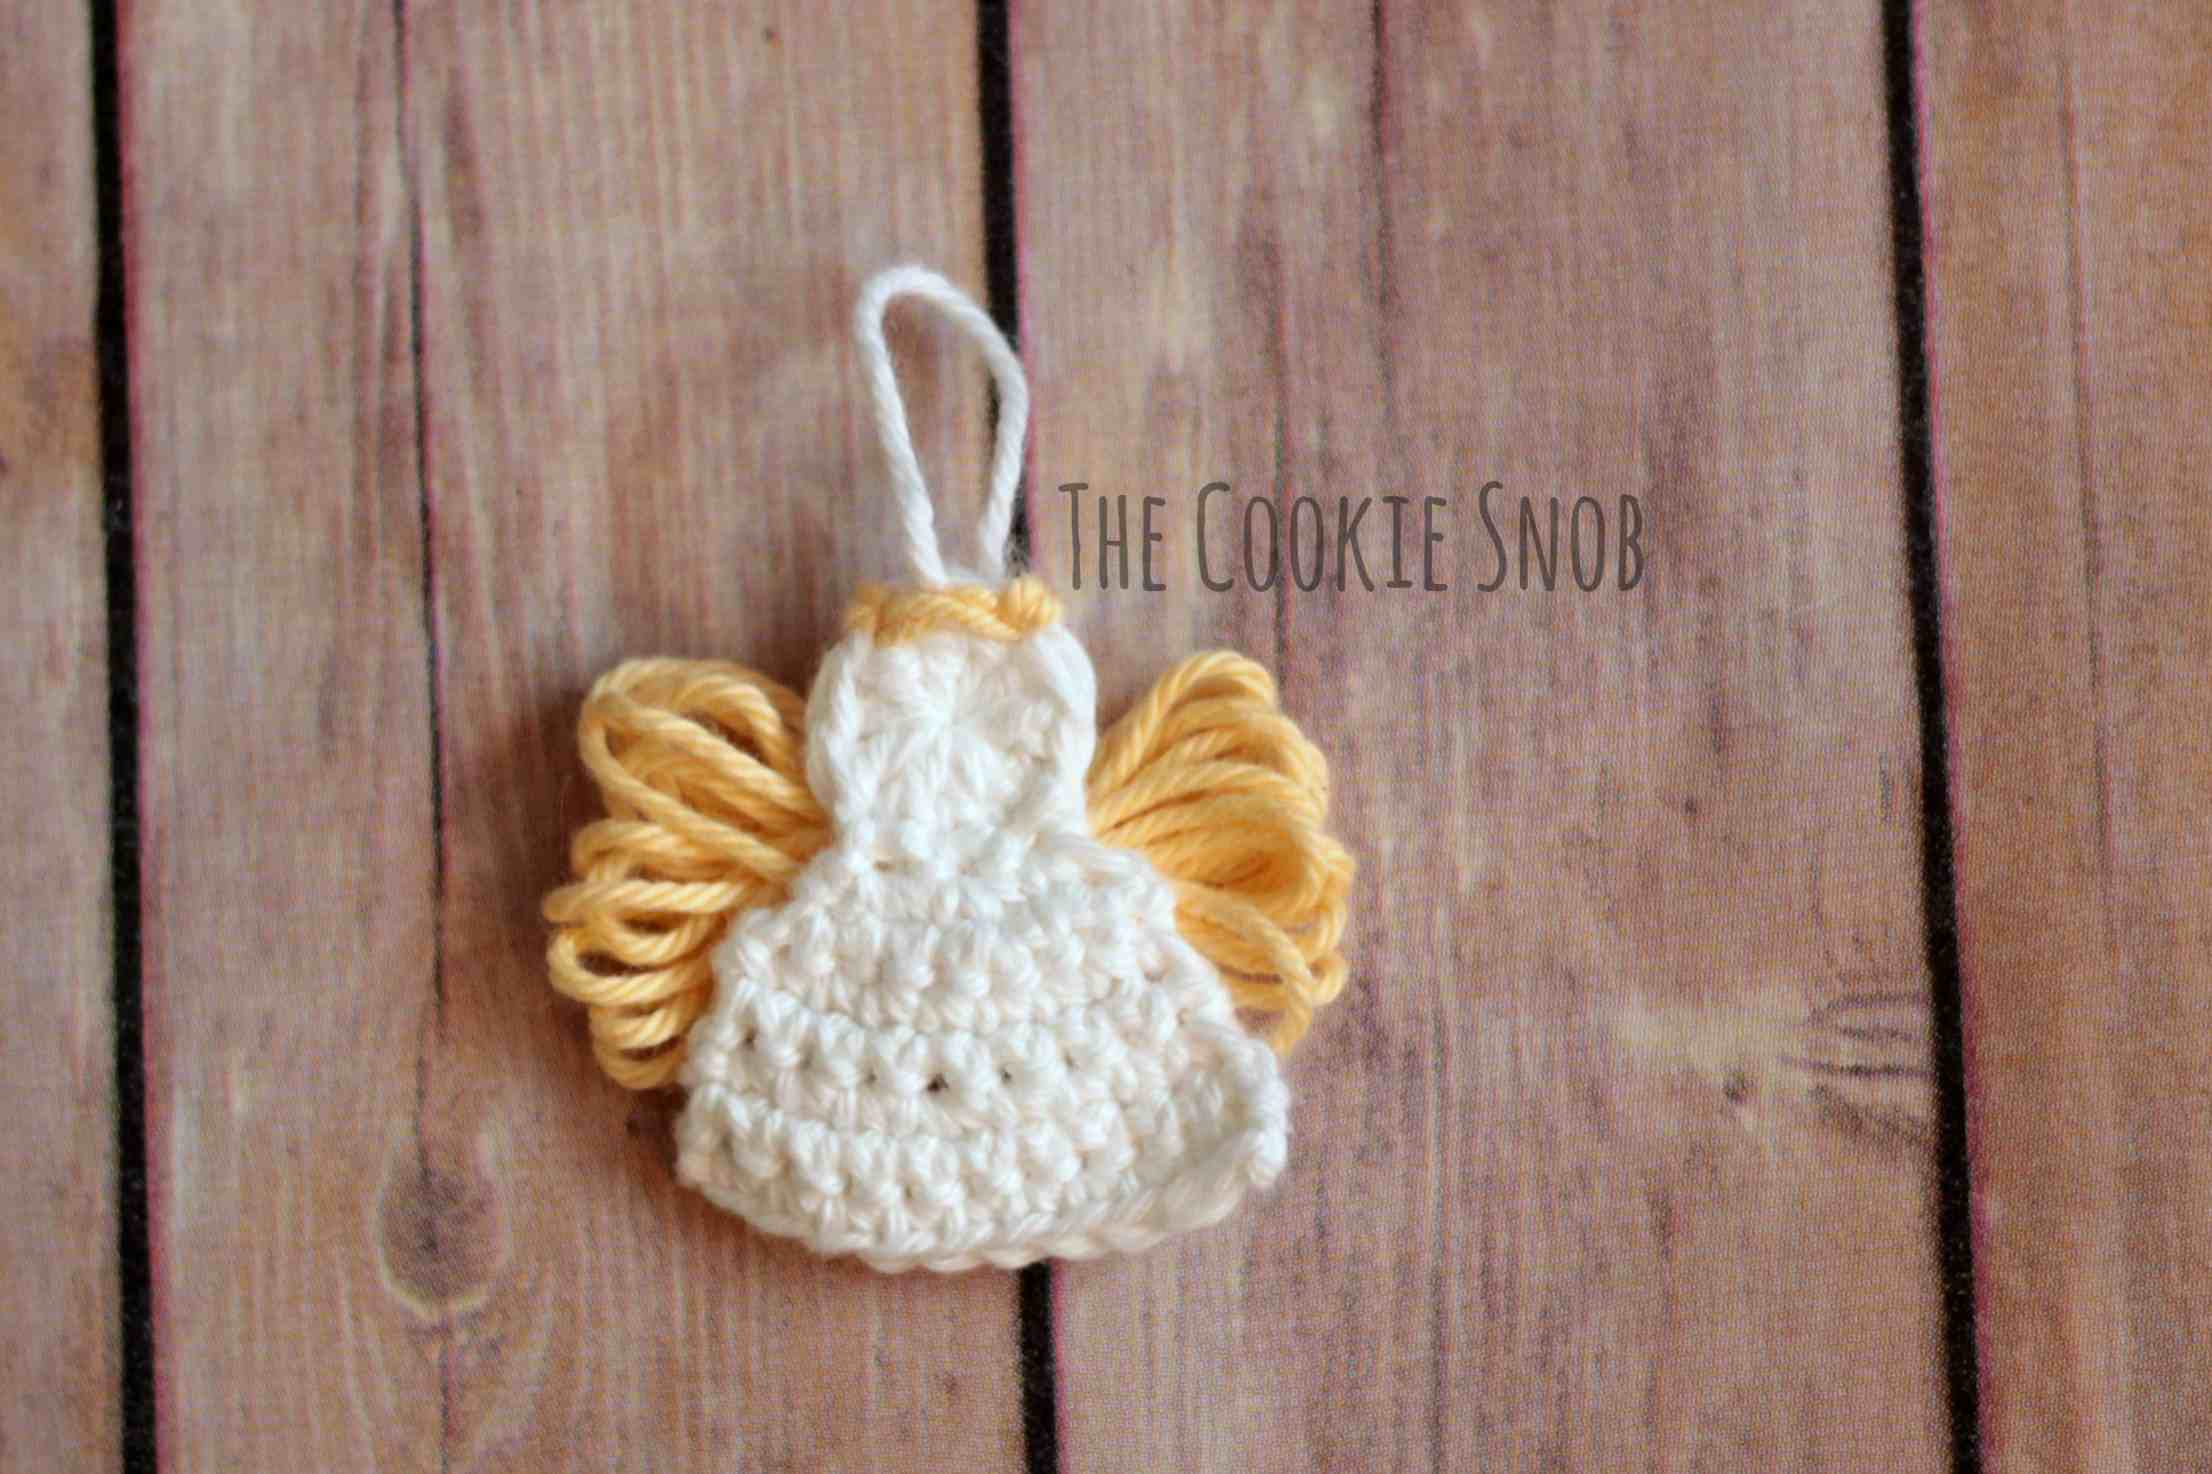 Crochet Angel Patterns Free Crochet Angel Patterns For Christmas And Every Day